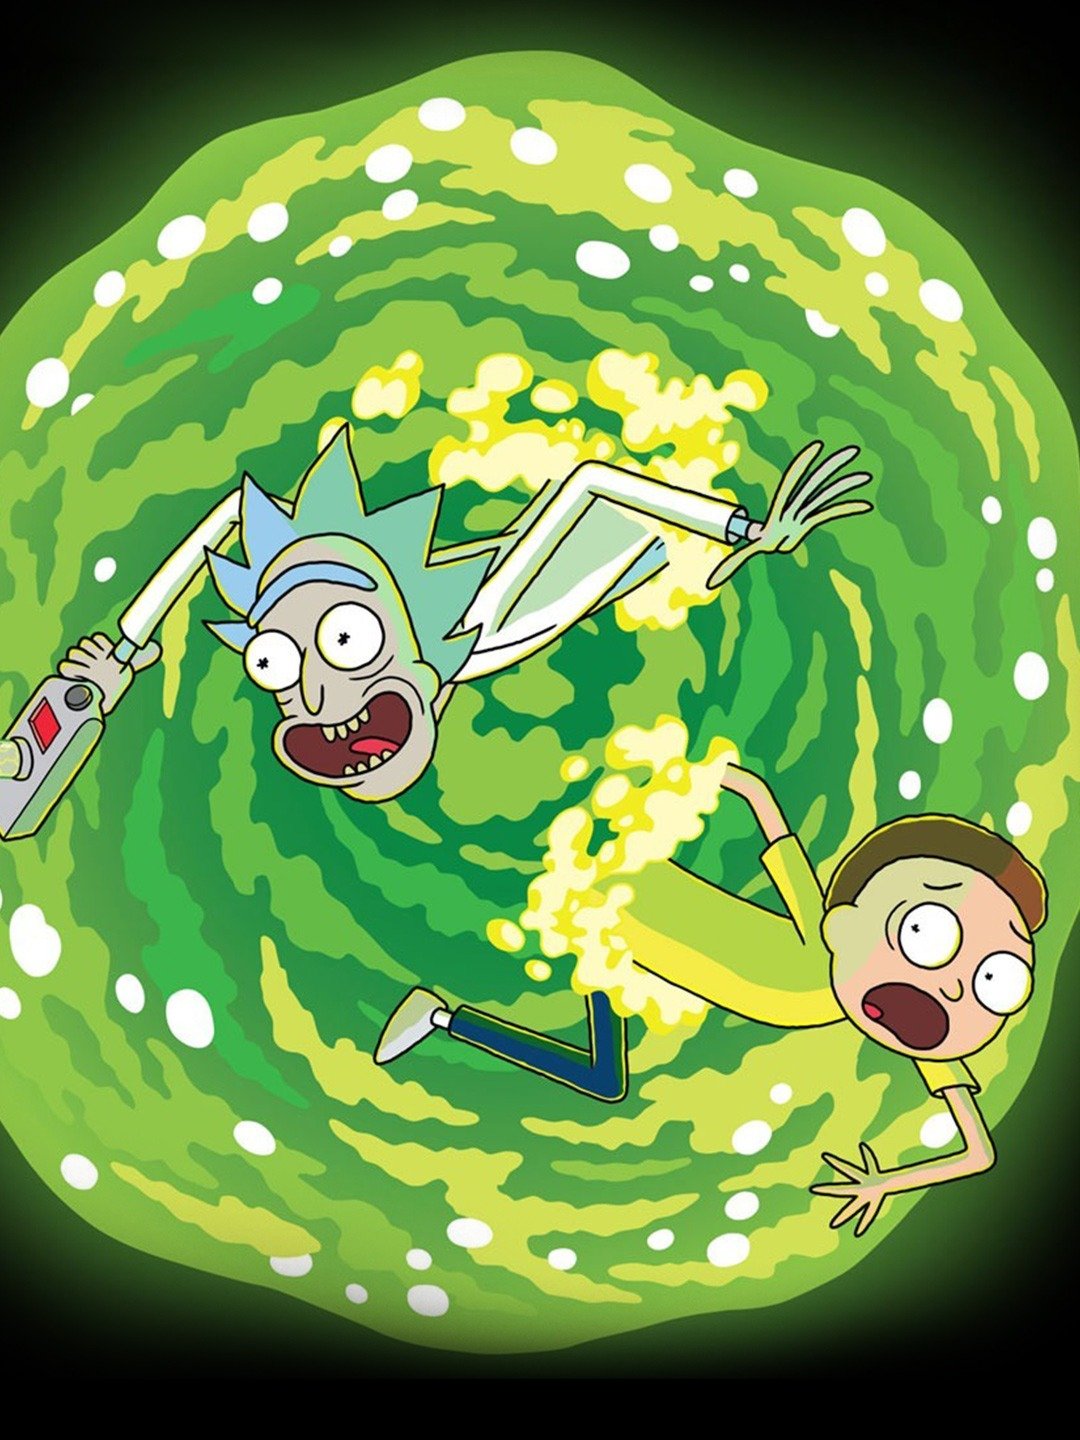 rick and morty season 2 couchtuner